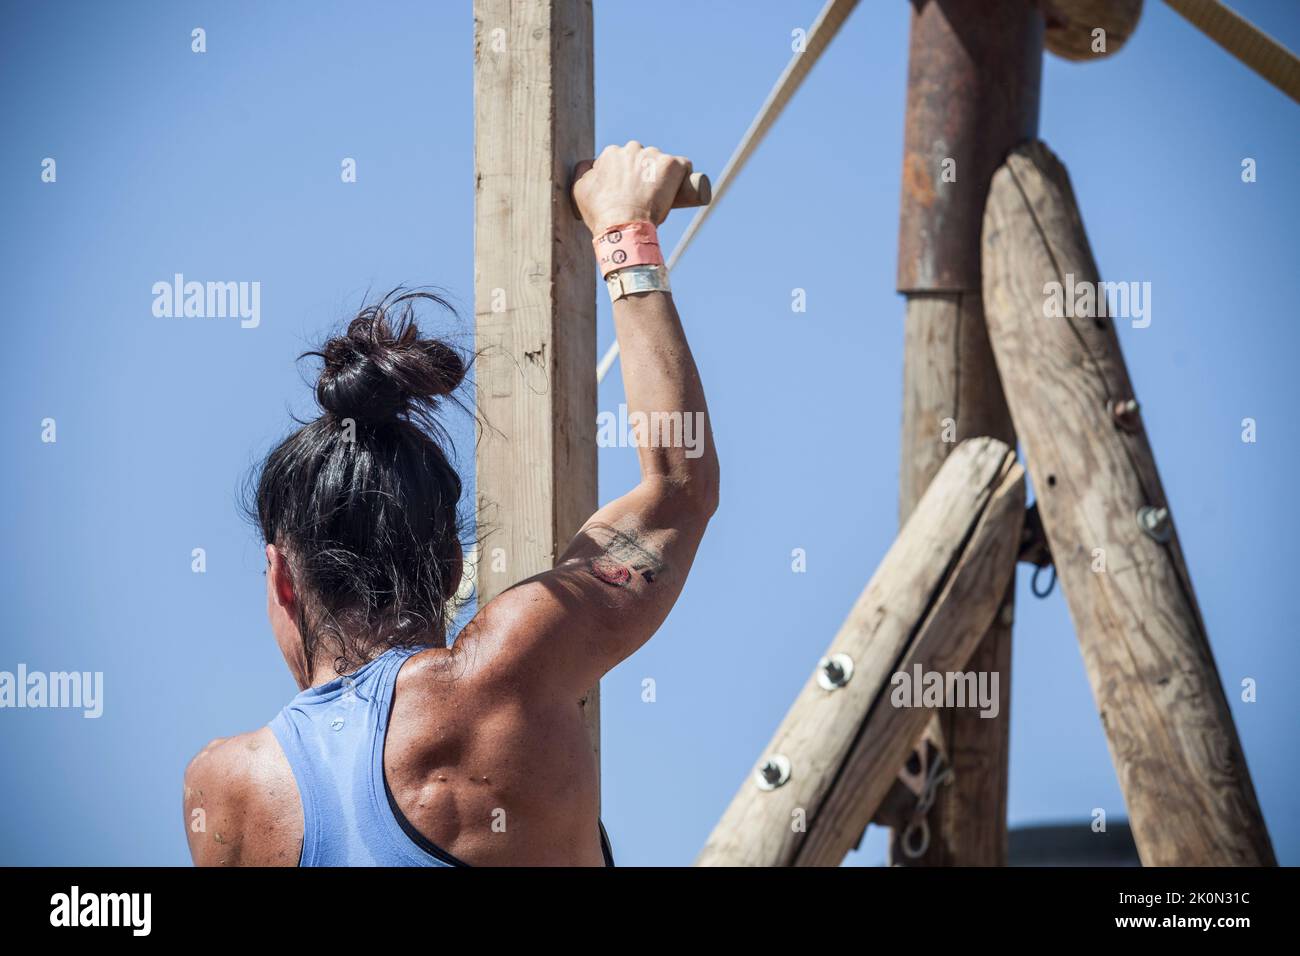 Merida, Spain - Sept 11th, 2022: FarinatoRace Merida 2022. Toughest obstacle course in the world. Woman climbing up a wooden beam with spikes Stock Photo